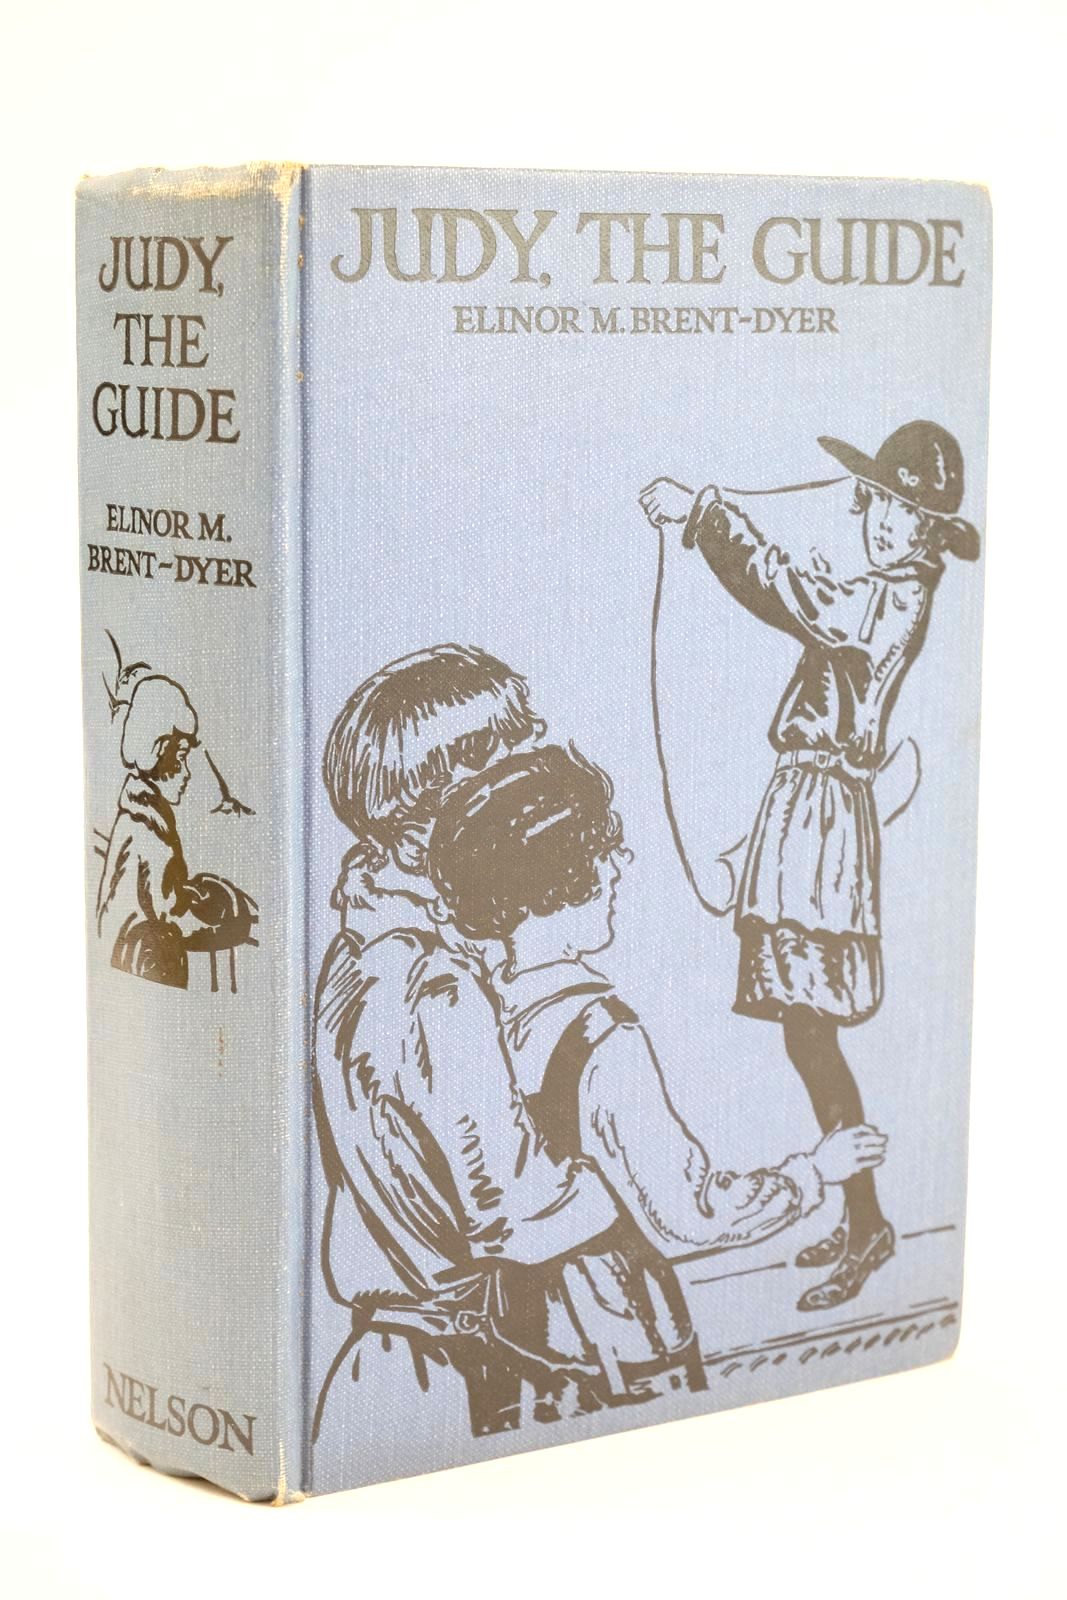 Photo of JUDY THE GUIDE written by Brent-Dyer, Elinor M. illustrated by Govey, Lilian A. published by Thomas Nelson and Sons Ltd. (STOCK CODE: 1324983)  for sale by Stella & Rose's Books